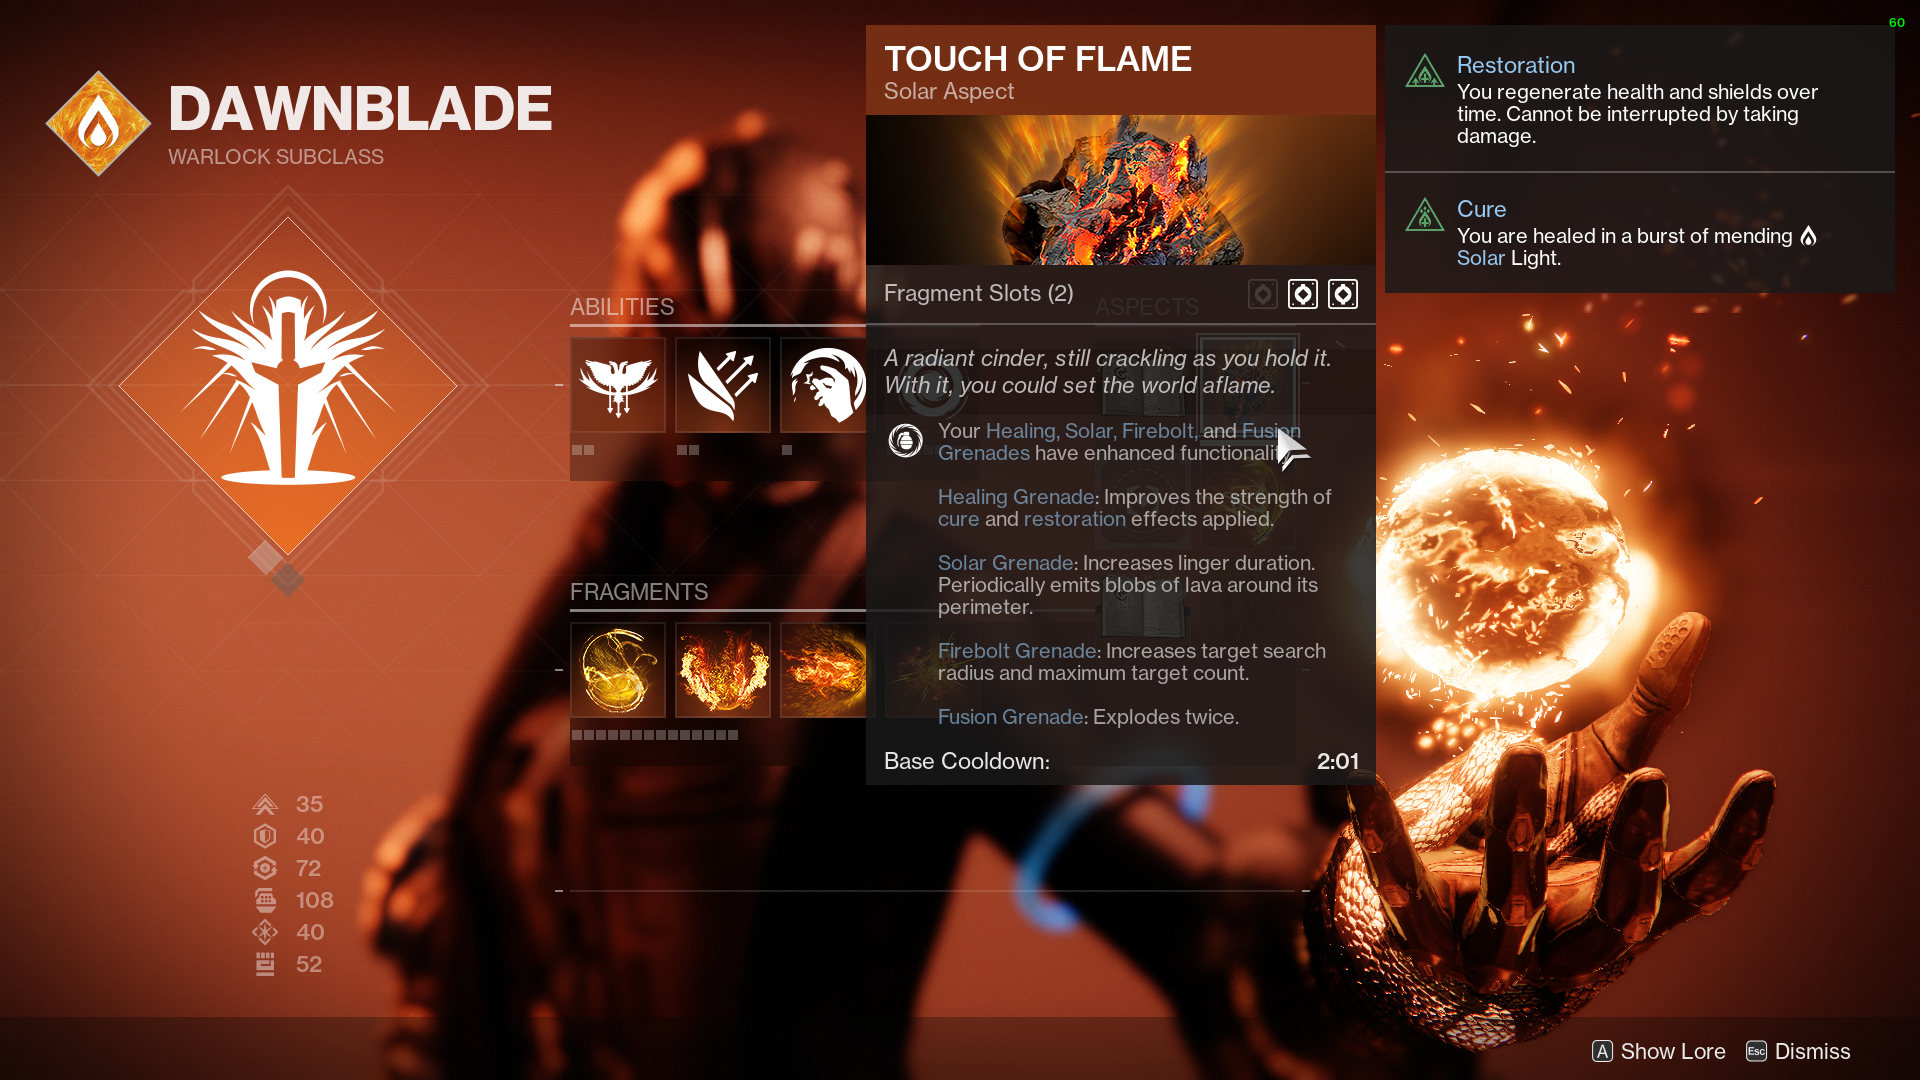 The Solar 3.0 screen for Warlocks, showcaseing one of the aspects that augment their abilities